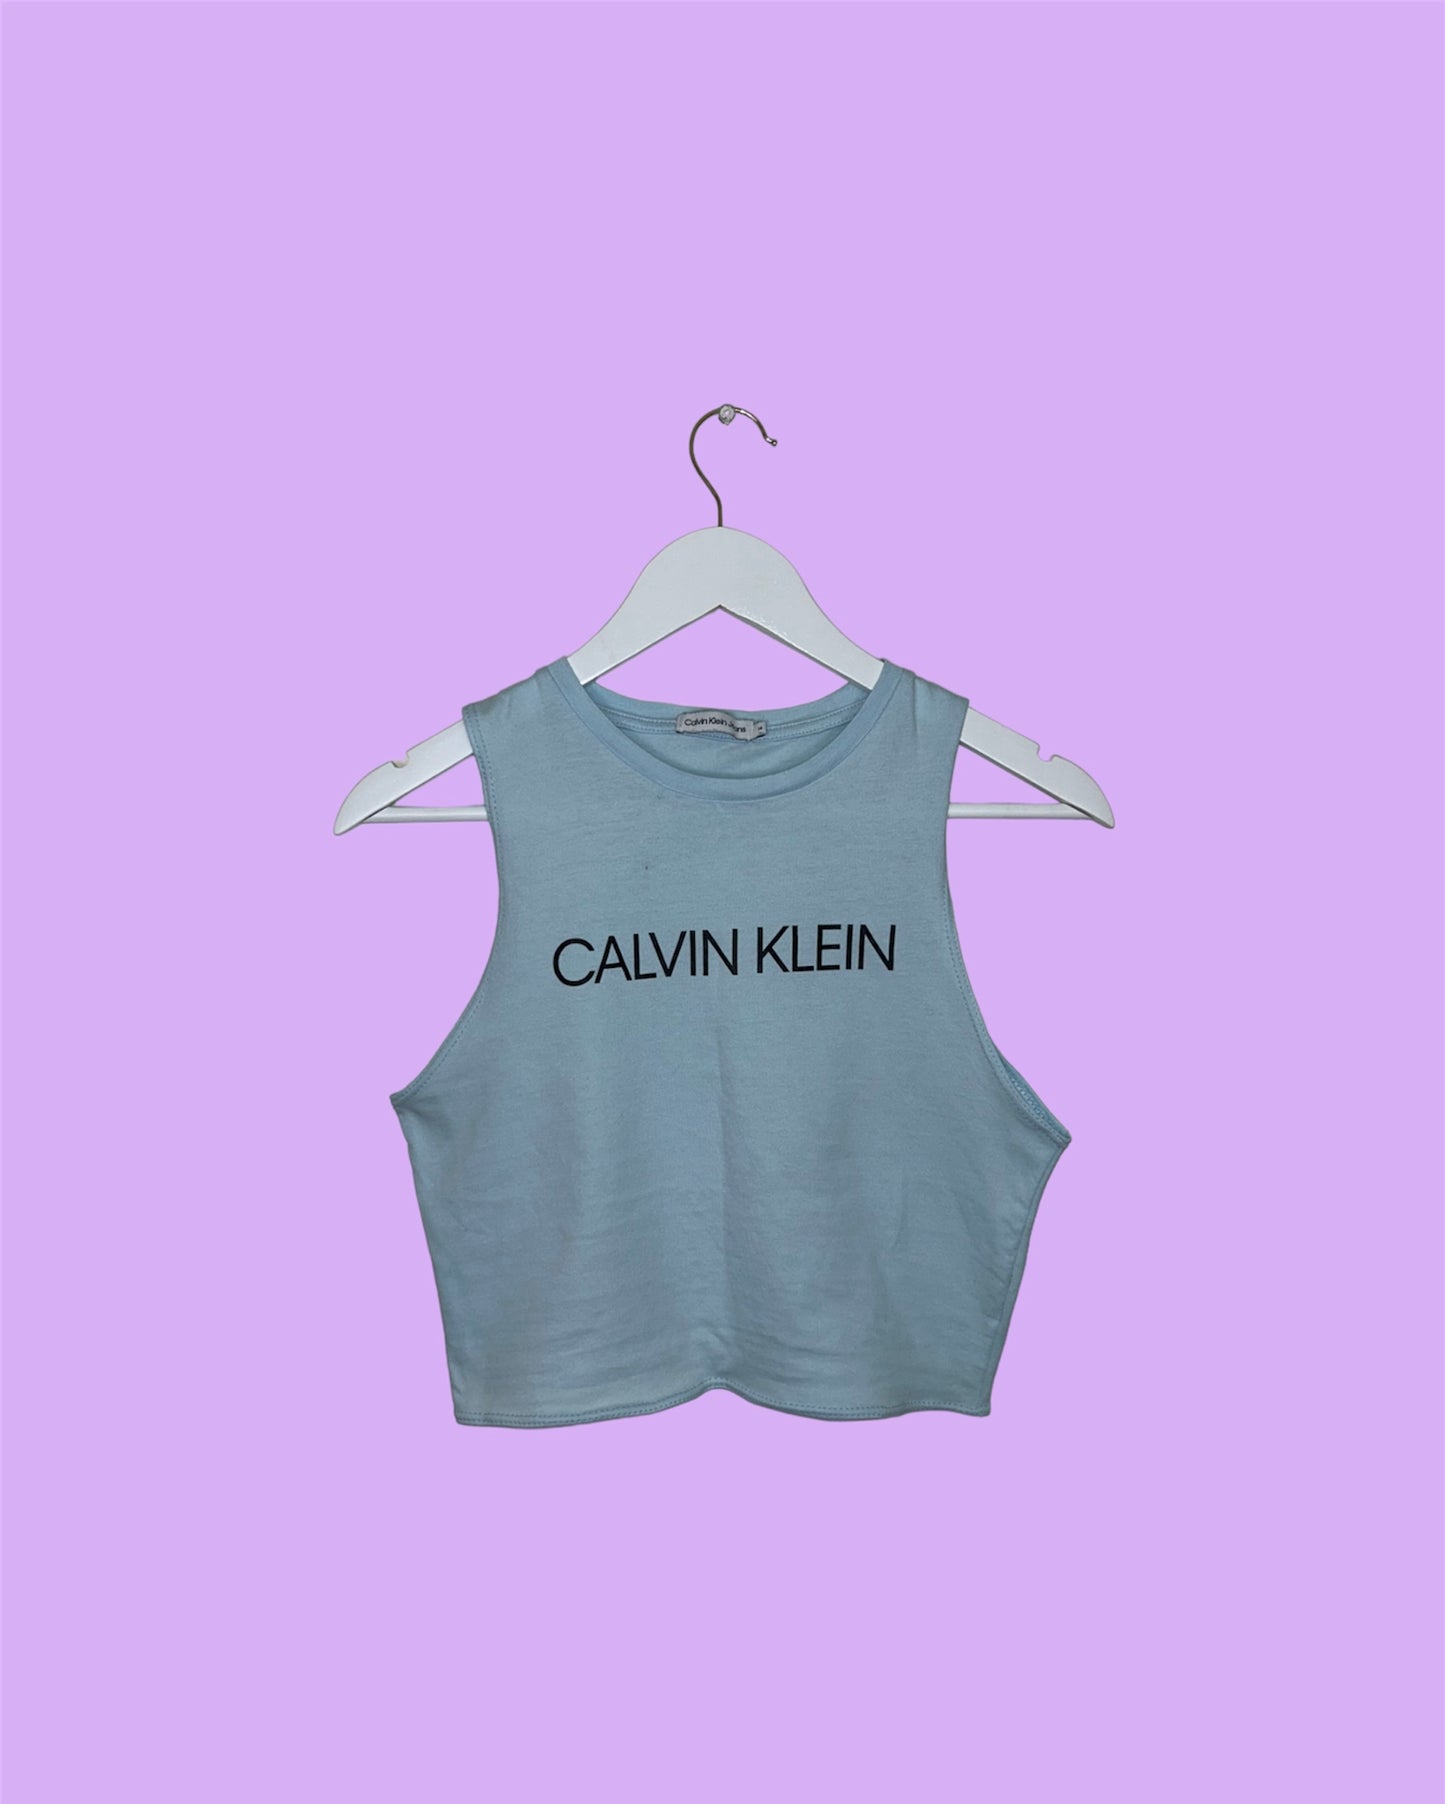 baby blue sleeveless crop top with black calvin klein logo shown on a lilac background